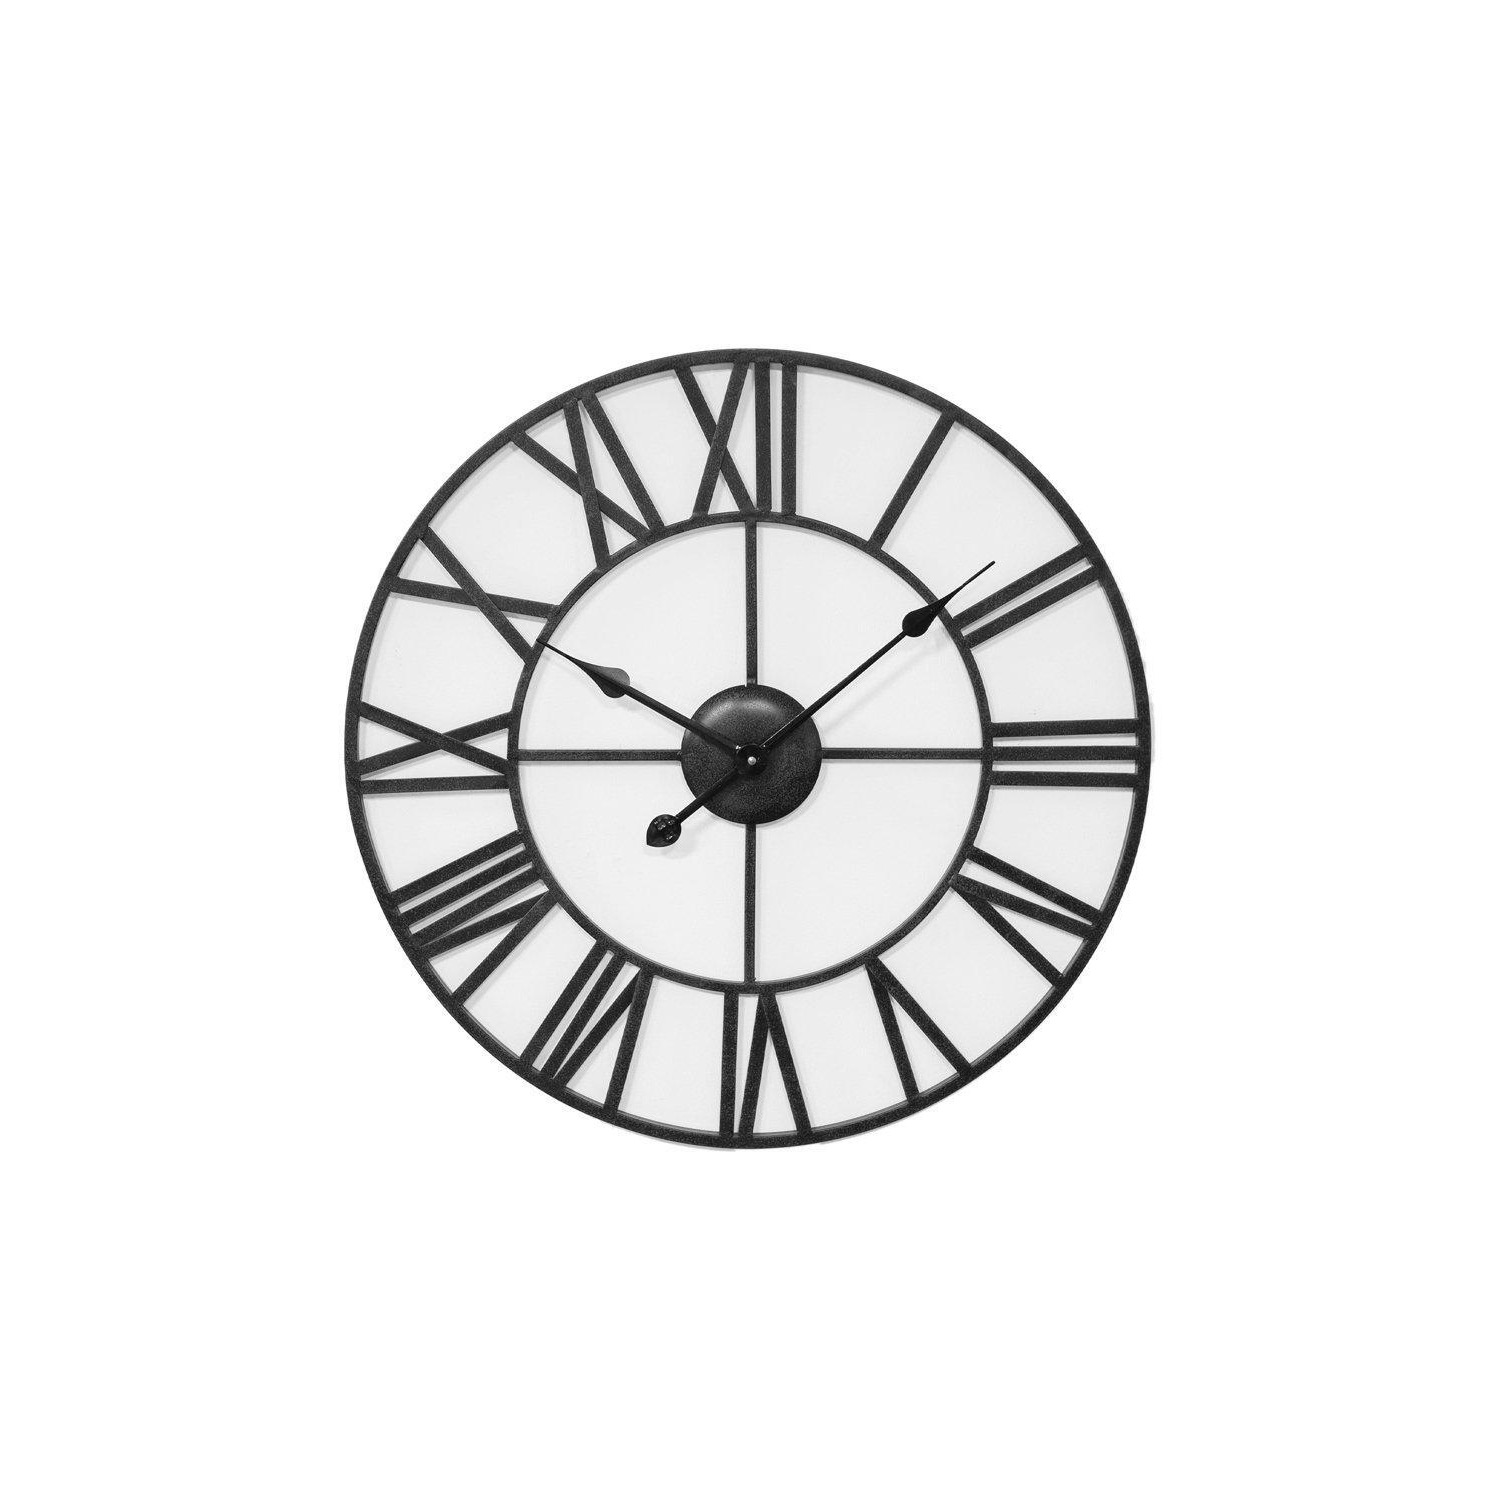 Wrought Metal Cut Out Wall Clock 60cm - image 1